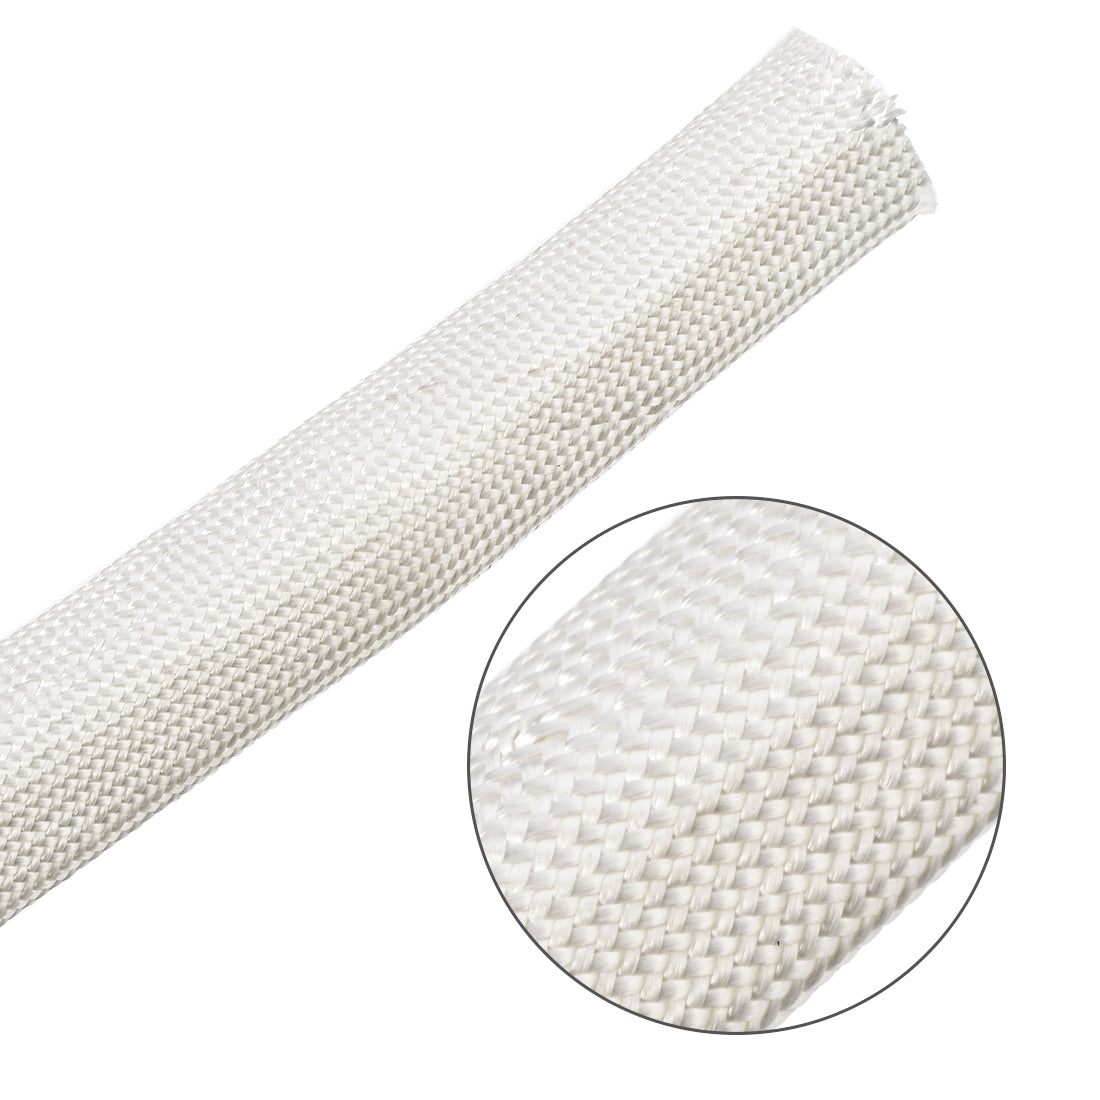 uxcell Uxcell Insulation Cable Protector, 9.8Ft-16mm High TEMP Fiberglass Sleeve White